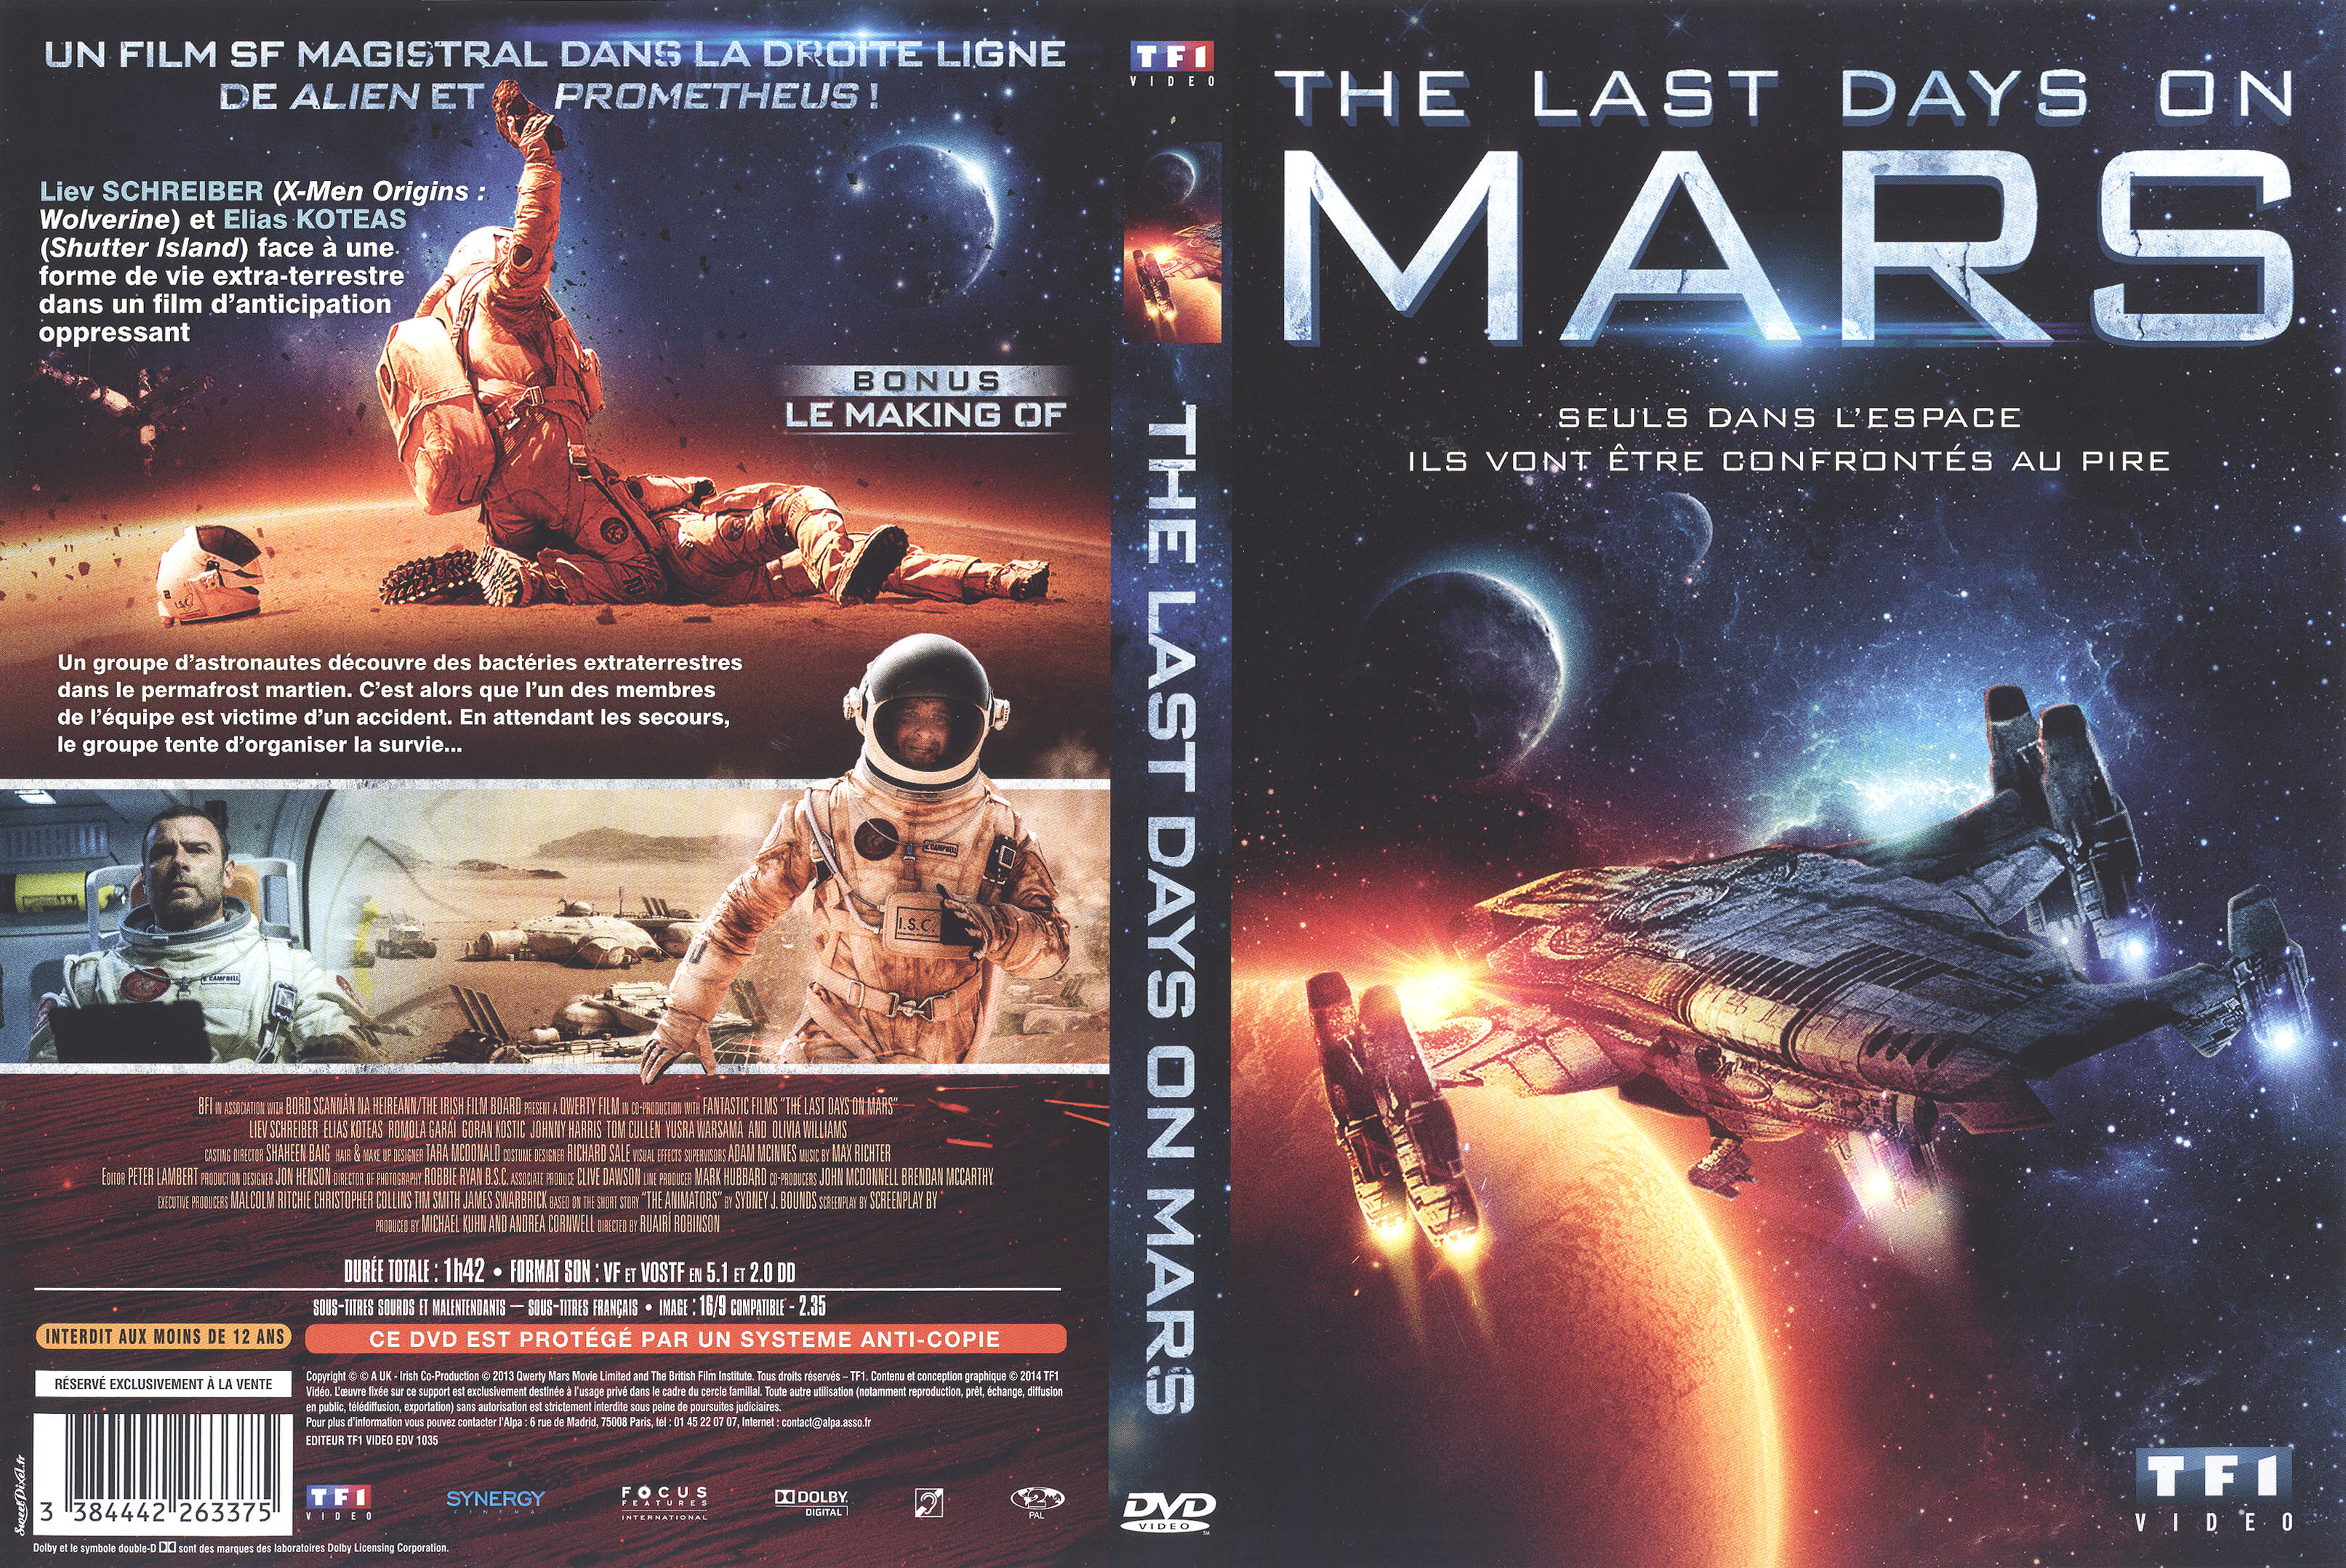 Jaquette DVD The last days on Mars